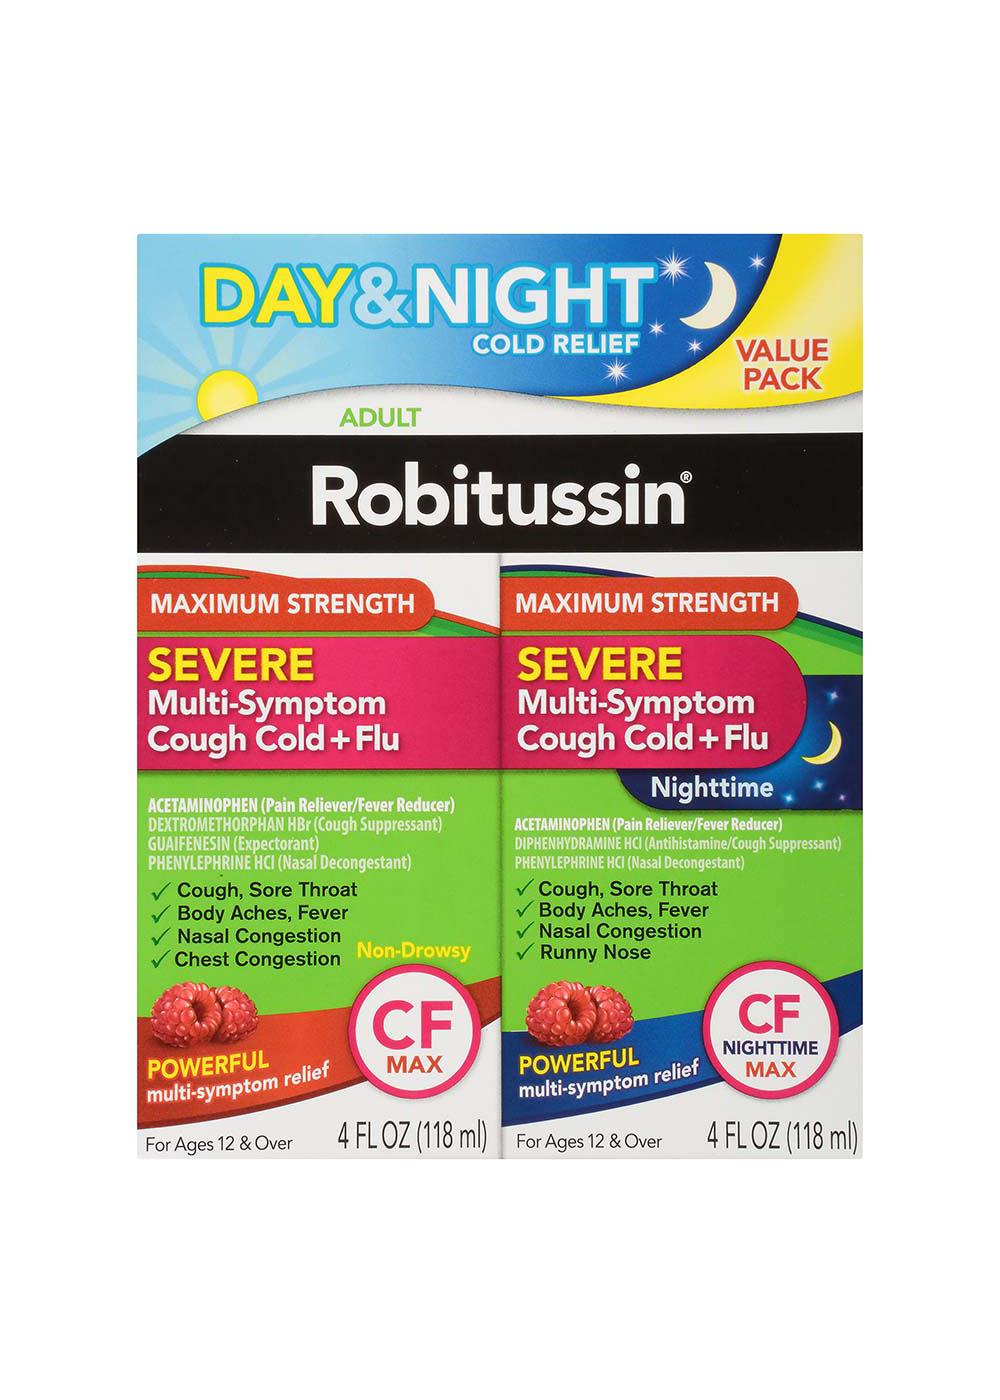 Robitussin Severe Day & Night Cold Relief Liquid - Value Pack; image 1 of 3